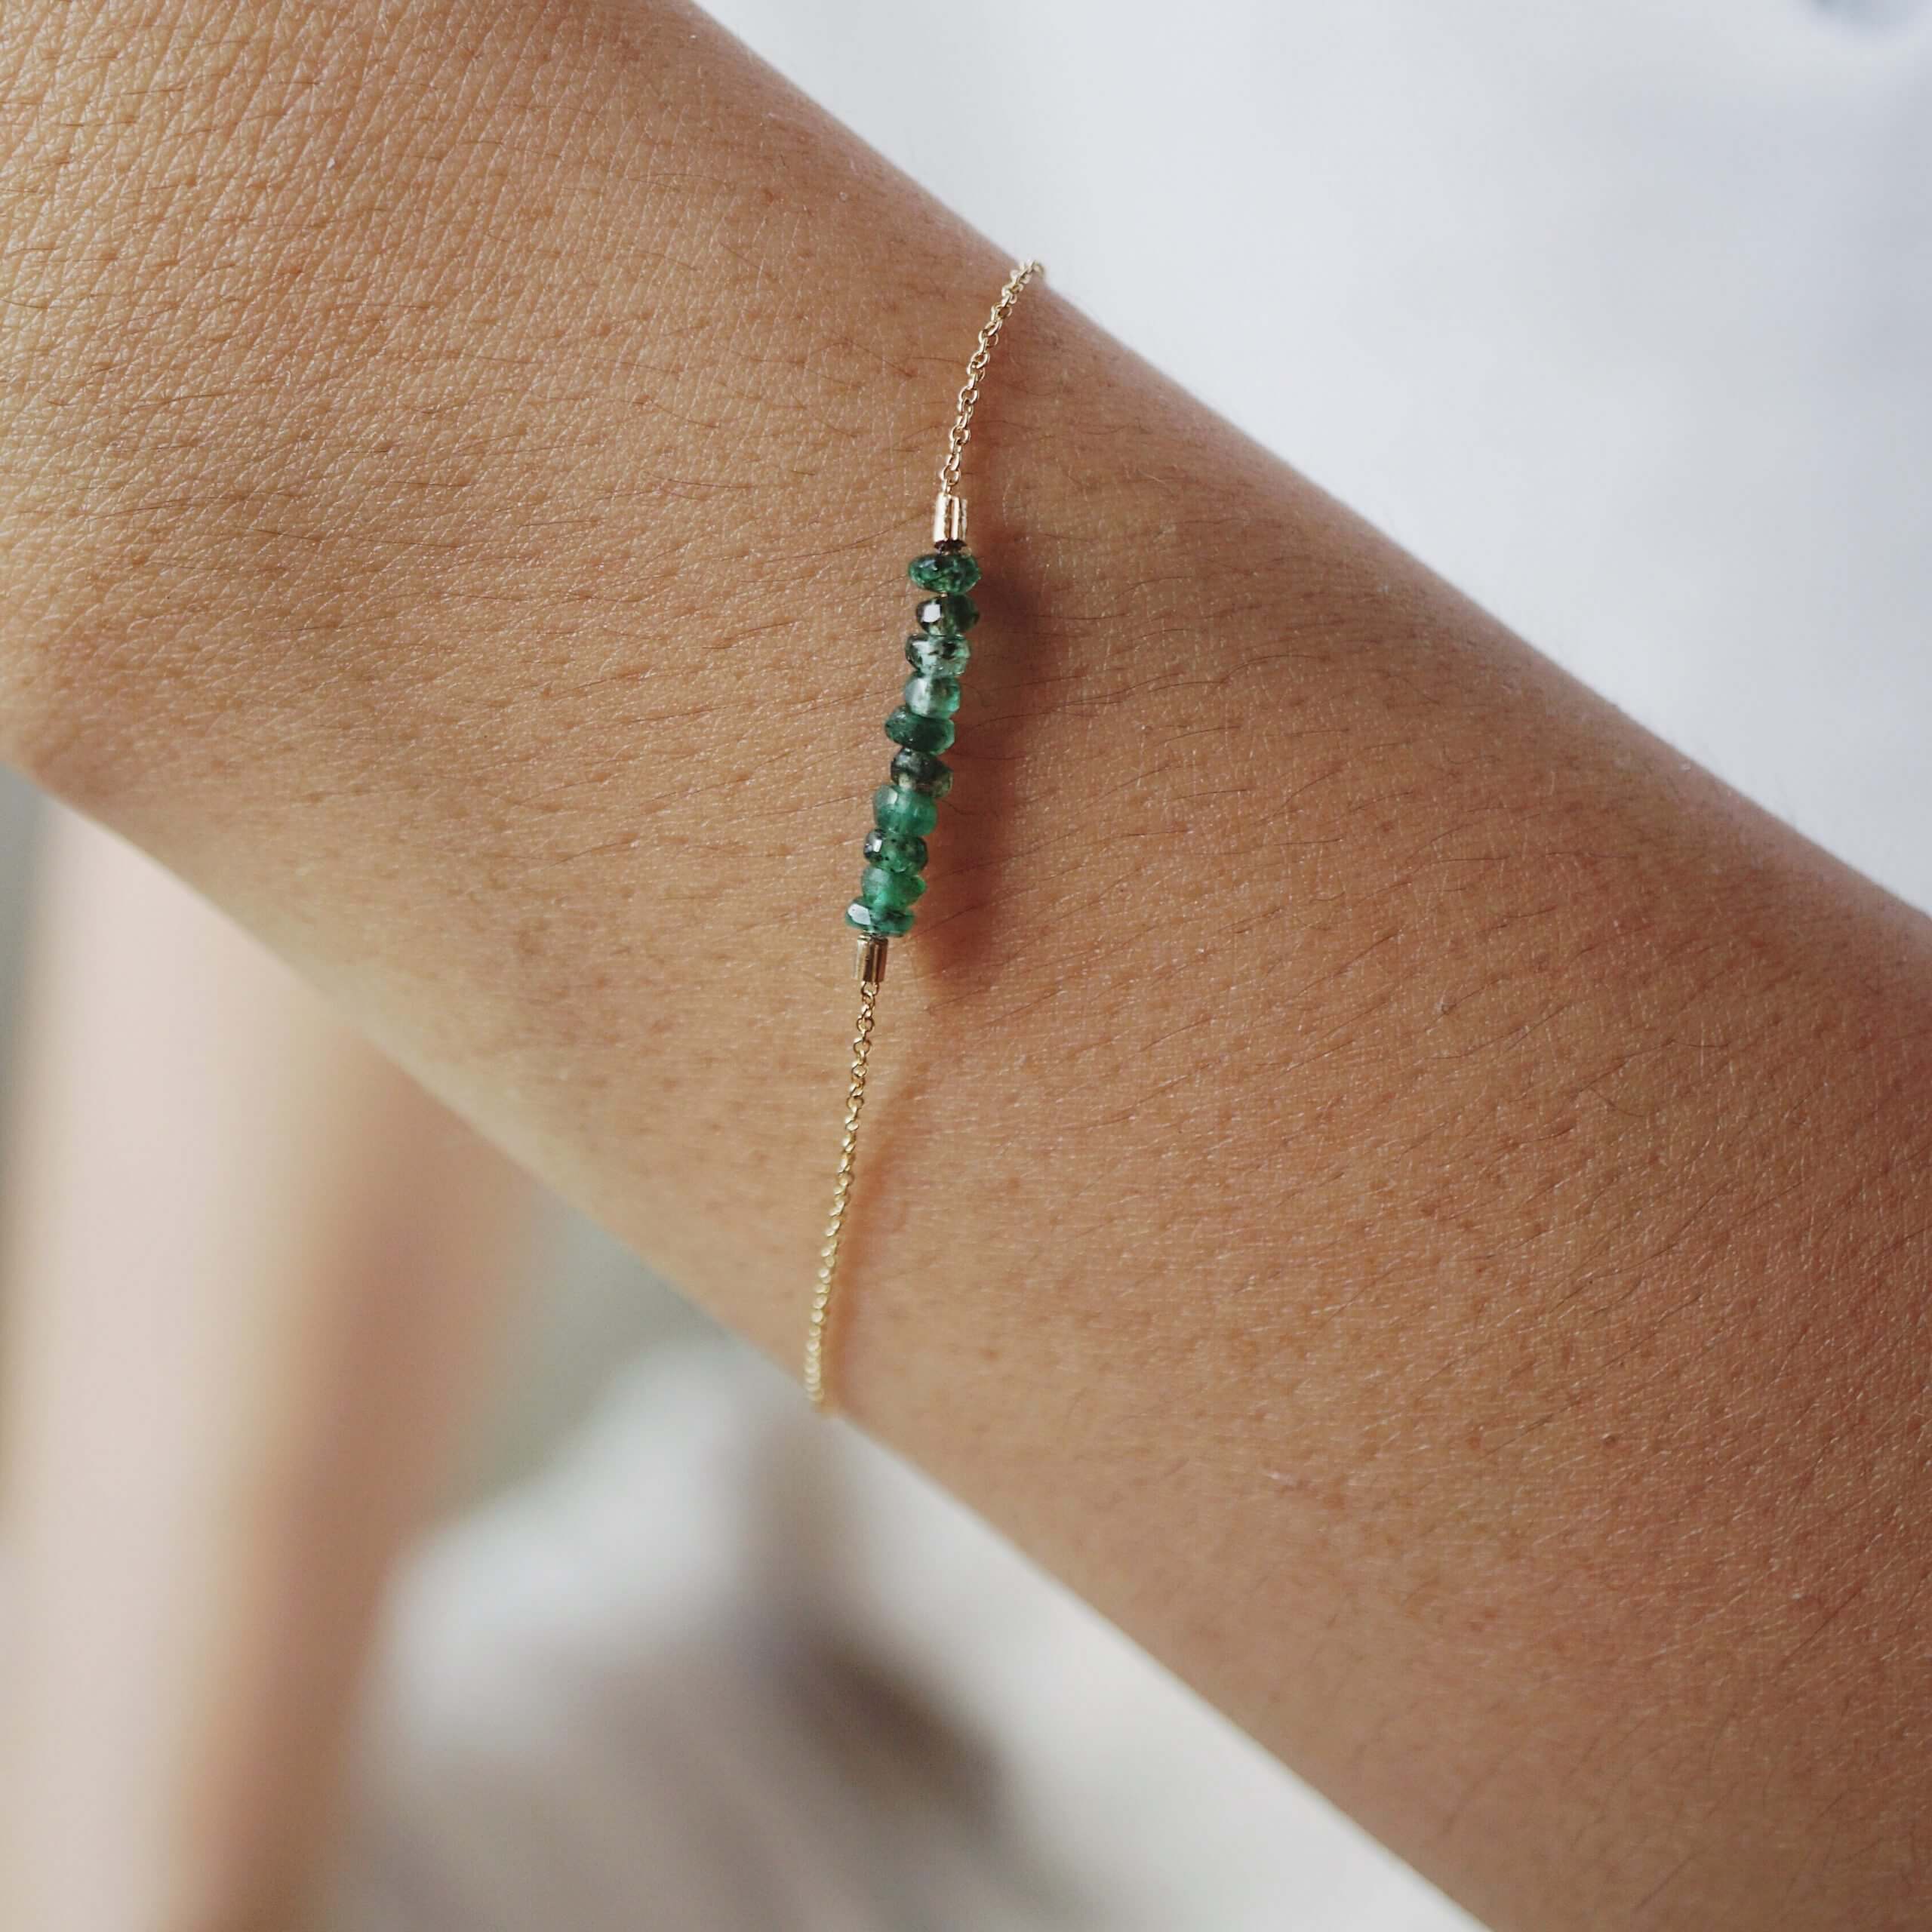 Gold Plated Bracelet with Green and White Crystals - Emerald Green Crystal  Bracelet Bangle by Blingvine